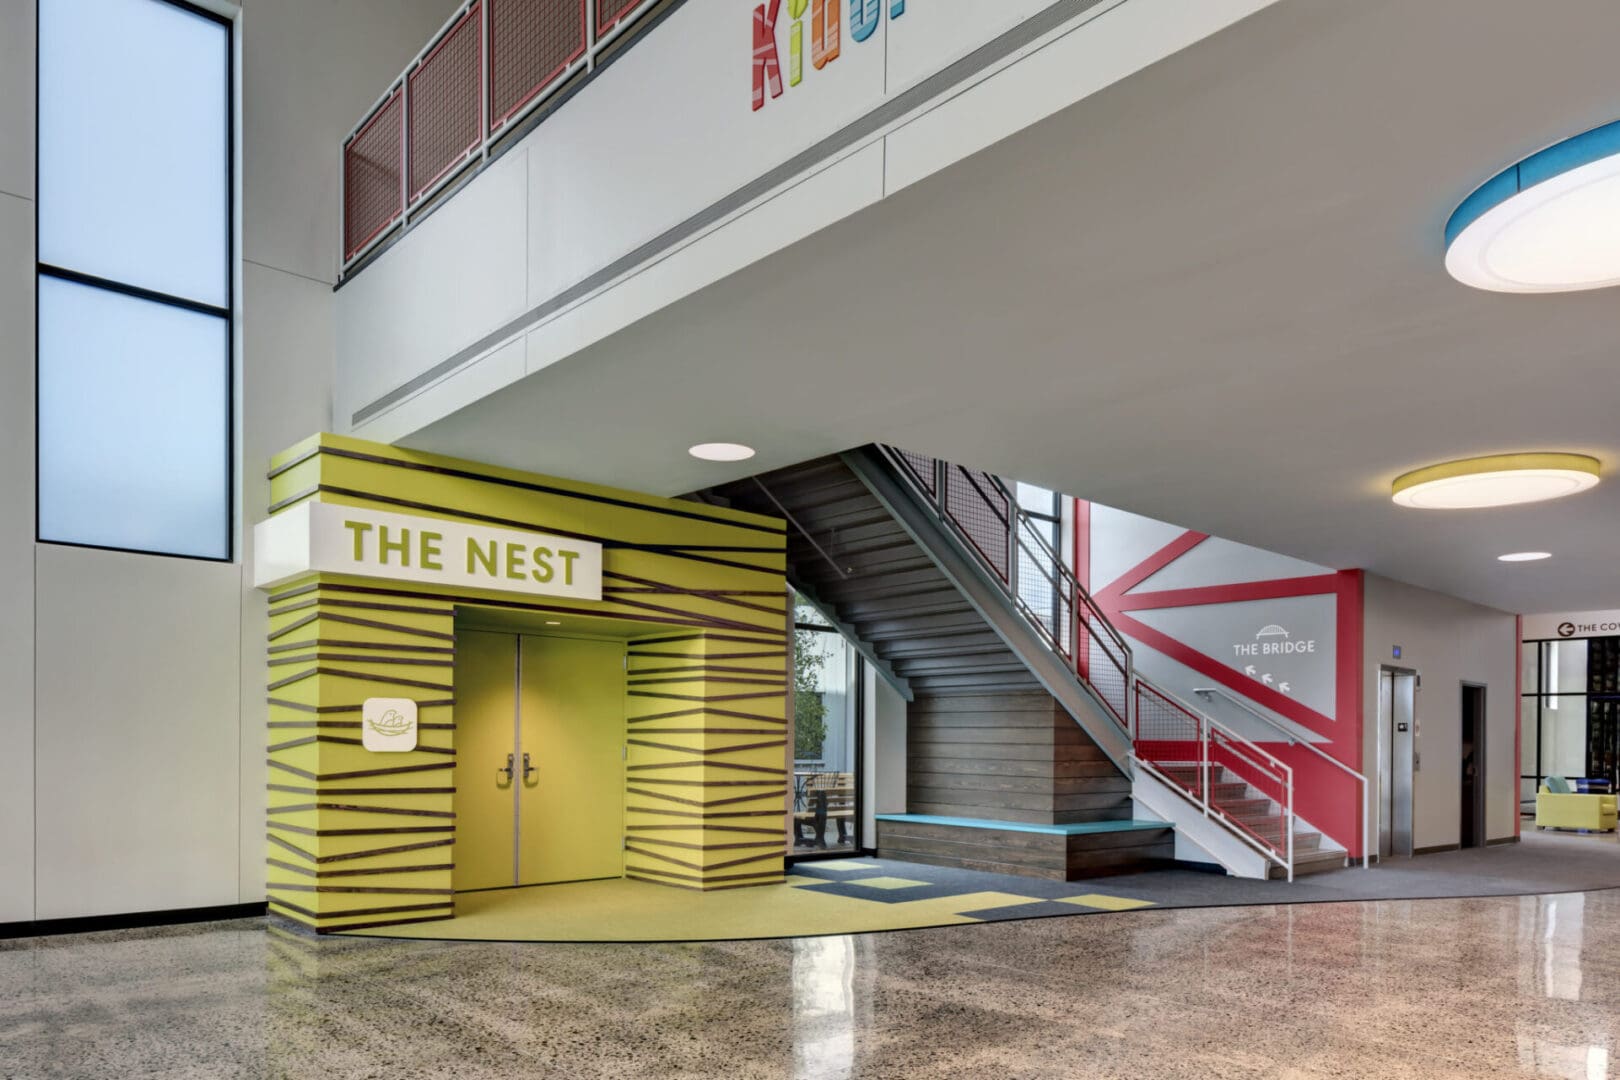 A lobby with stairs and a sign that says " the nest ".